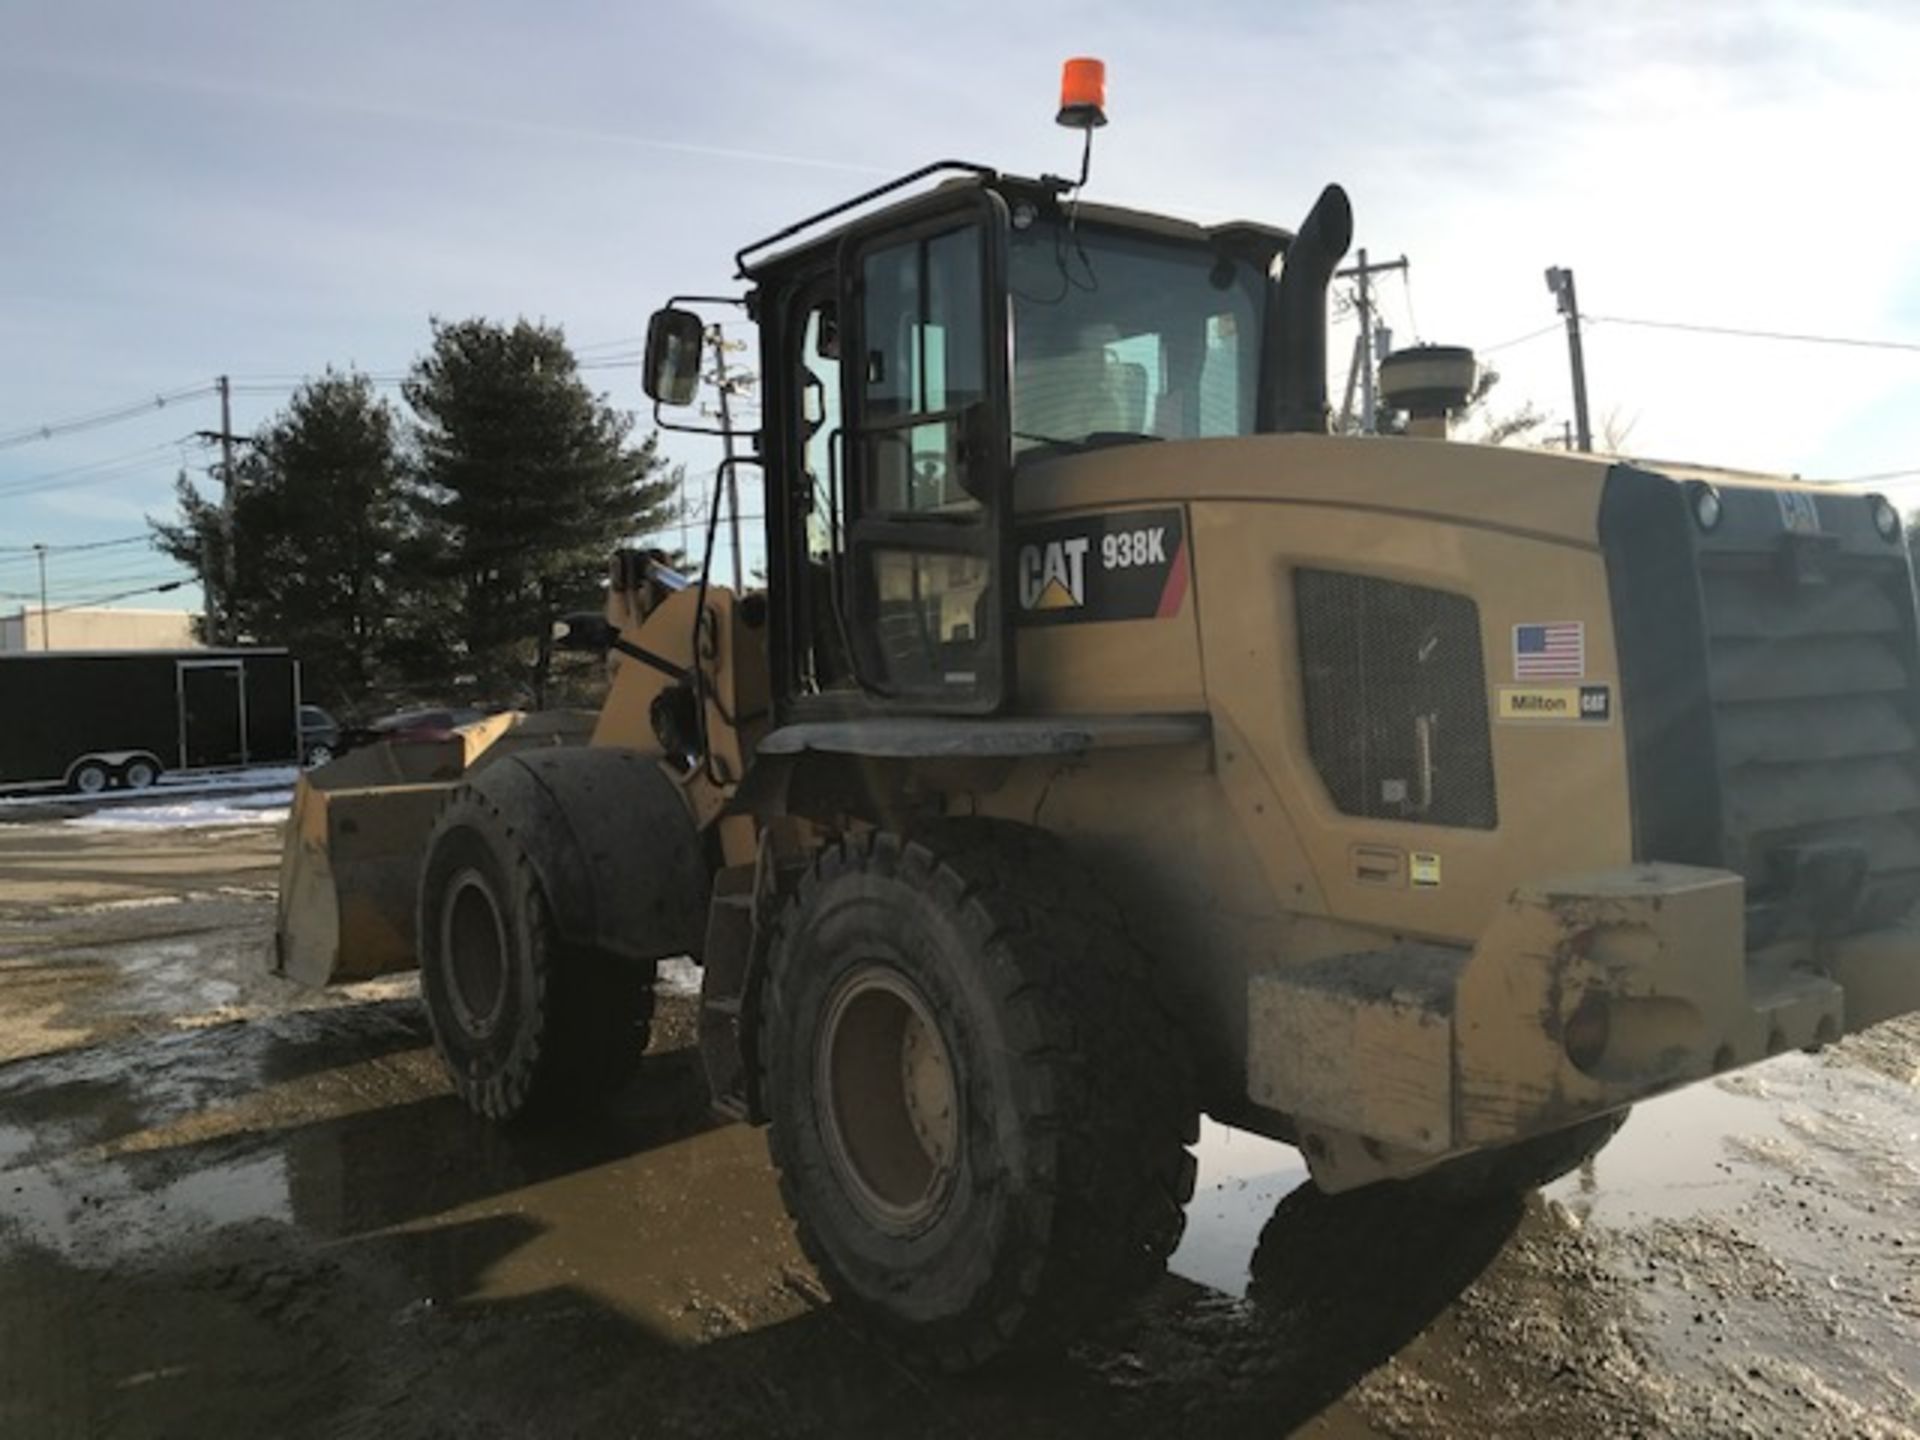 2014 Caterpillar 938K Rubber Tire, Articulated Loader with 6 Yard Bucket. Hours: 6,230 - See Desc. - Image 4 of 8